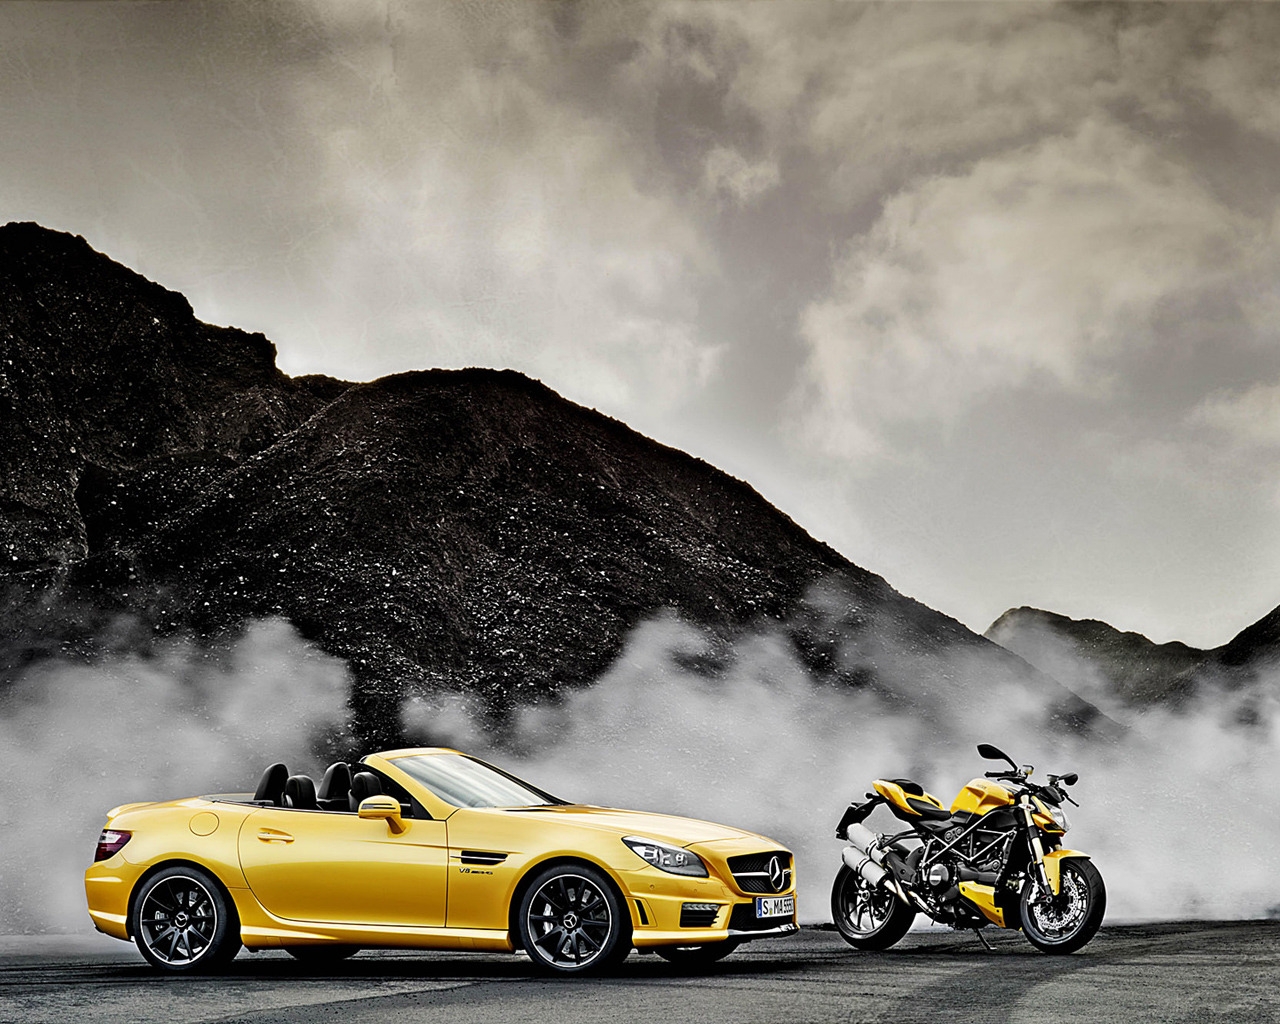 Mercedes SLK AMG and Ducati Streetfighter for 1280 x 1024 resolution